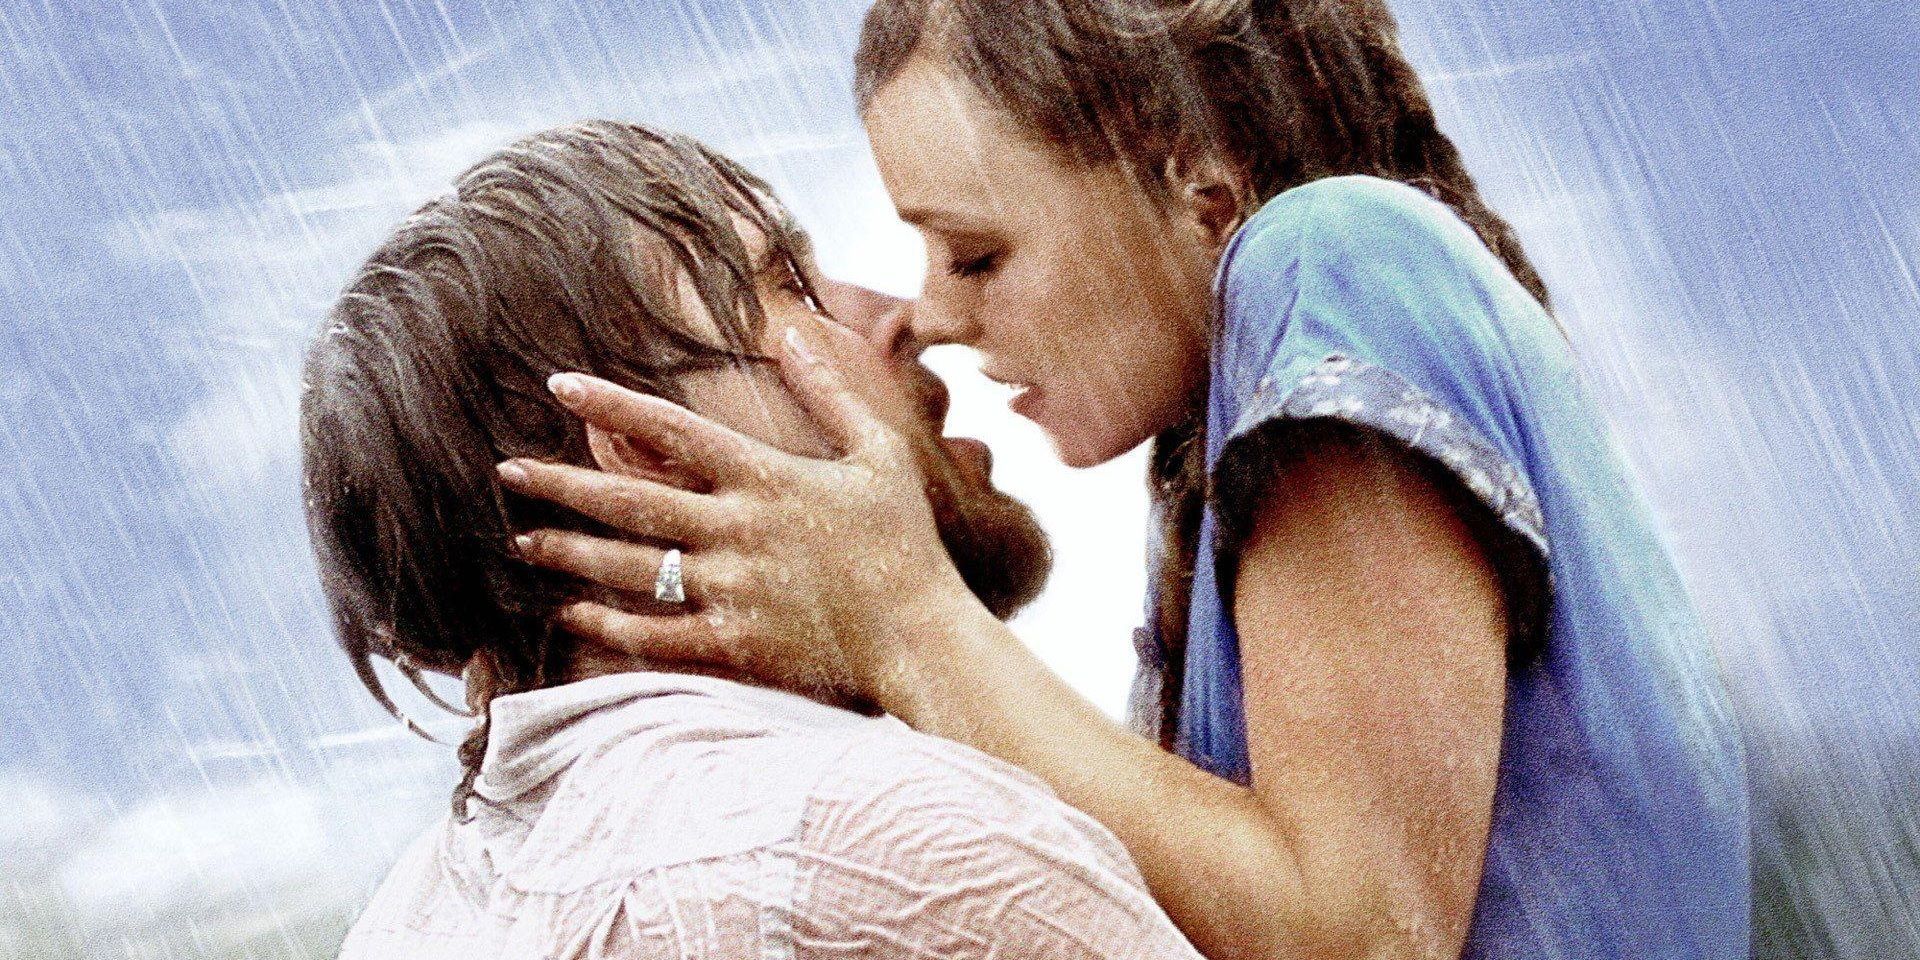 Ryan Gosling and Rachel McAdams on the poster for The Notebook